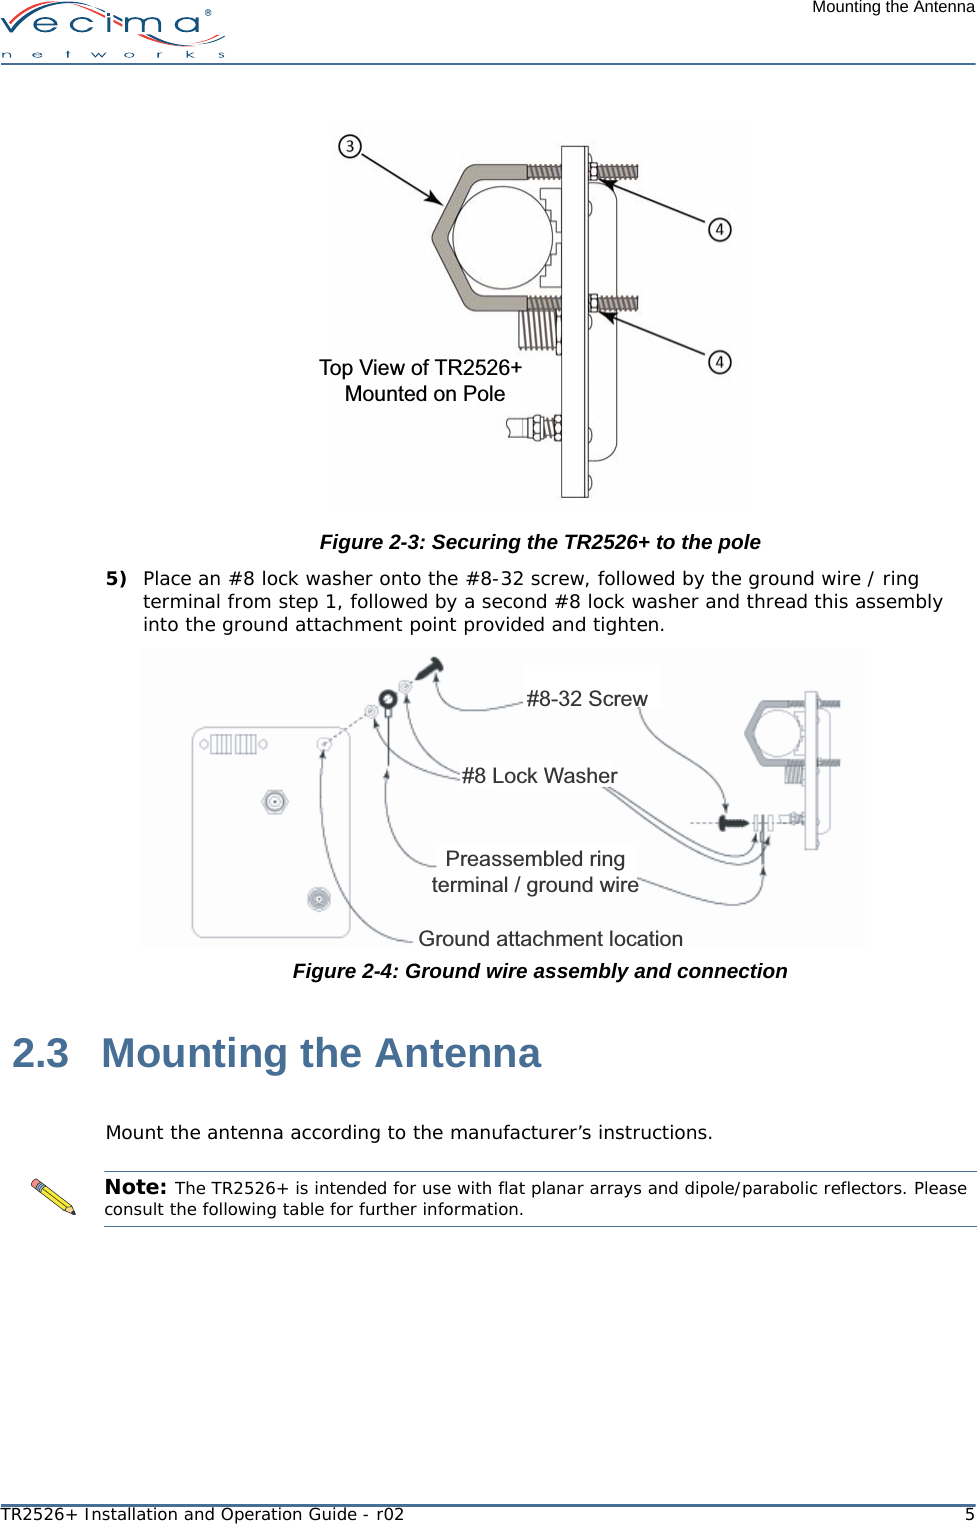 TR2526+ Installation and Operation Guide - r02 5Mounting the Antenna Figure 2-3: Securing the TR2526+ to the pole5) Place an #8 lock washer onto the #8-32 screw, followed by the ground wire / ring terminal from step 1, followed by a second #8 lock washer and thread this assembly into the ground attachment point provided and tighten.Figure 2-4: Ground wire assembly and connection 2.3 Mounting the AntennaMount the antenna according to the manufacturer’s instructions.Top View of TR2526+ Mounted on Pole#8-32 Screw#8 Lock WasherPreassembled ringterminal / ground wireGround attachment locationNote: The TR2526+ is intended for use with flat planar arrays and dipole/parabolic reflectors. Please consult the following table for further information.